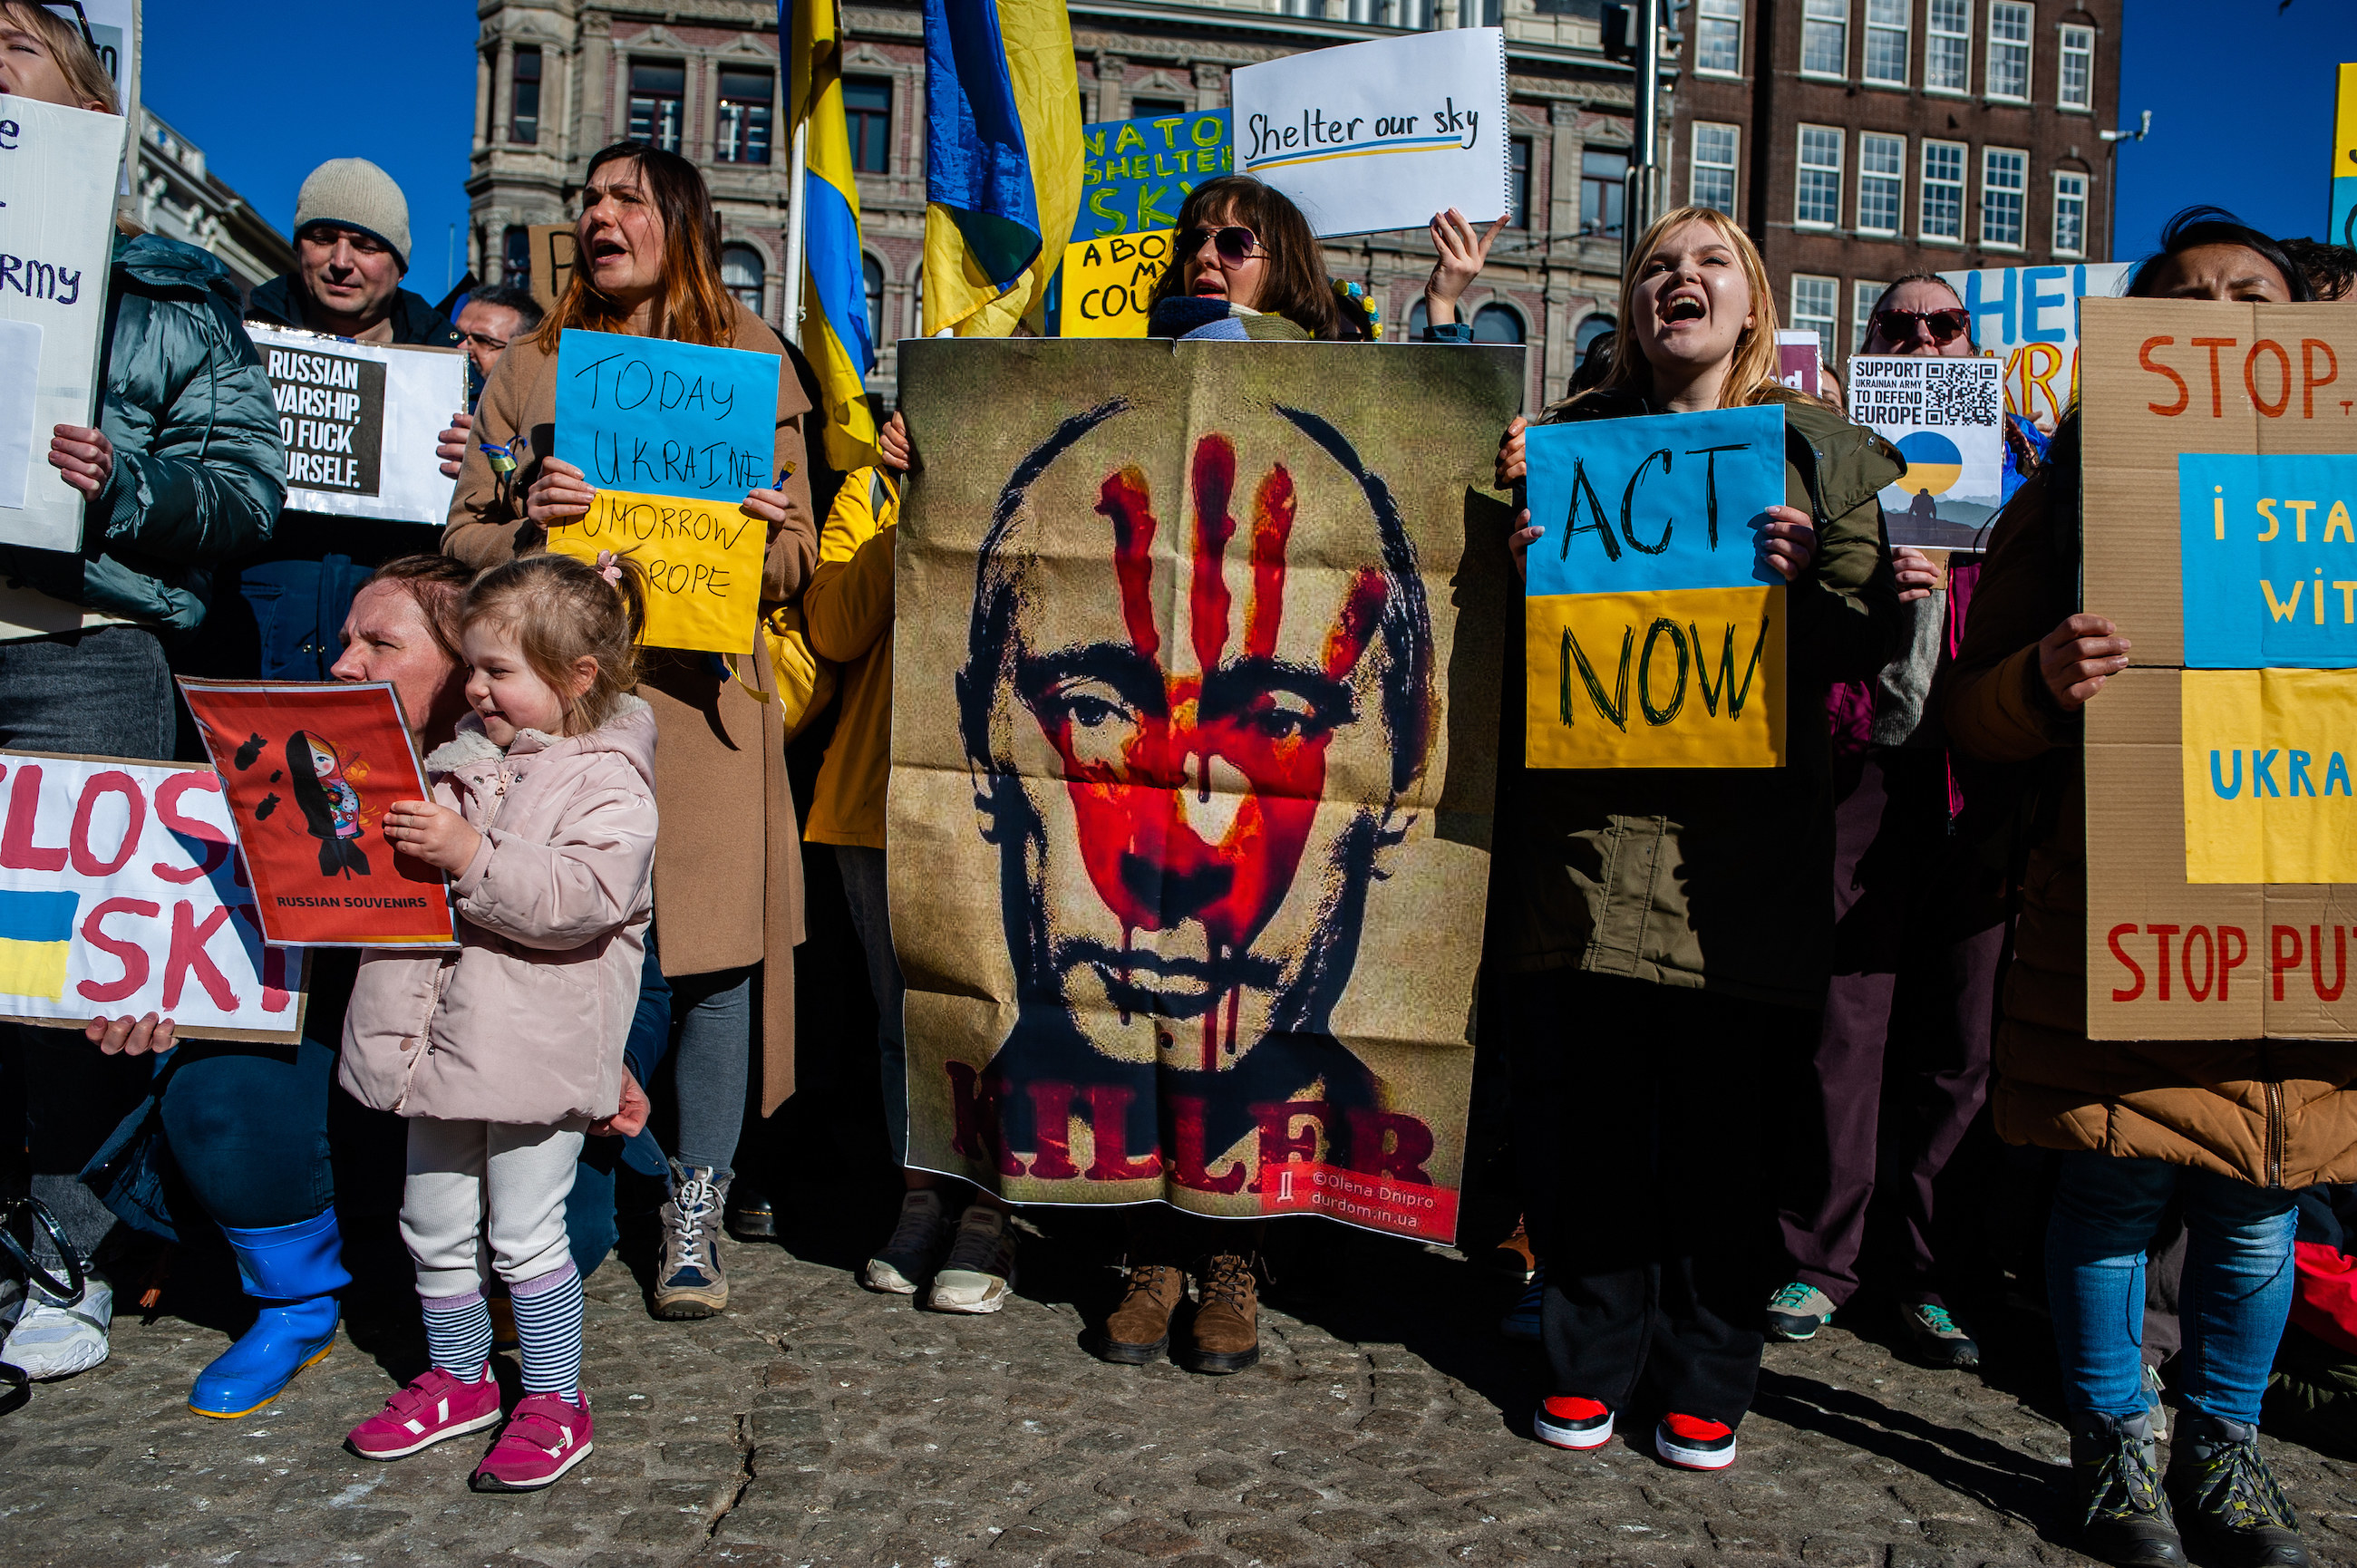 A group of people, including children, holding signs, including one of Putin with a red handprint over his face